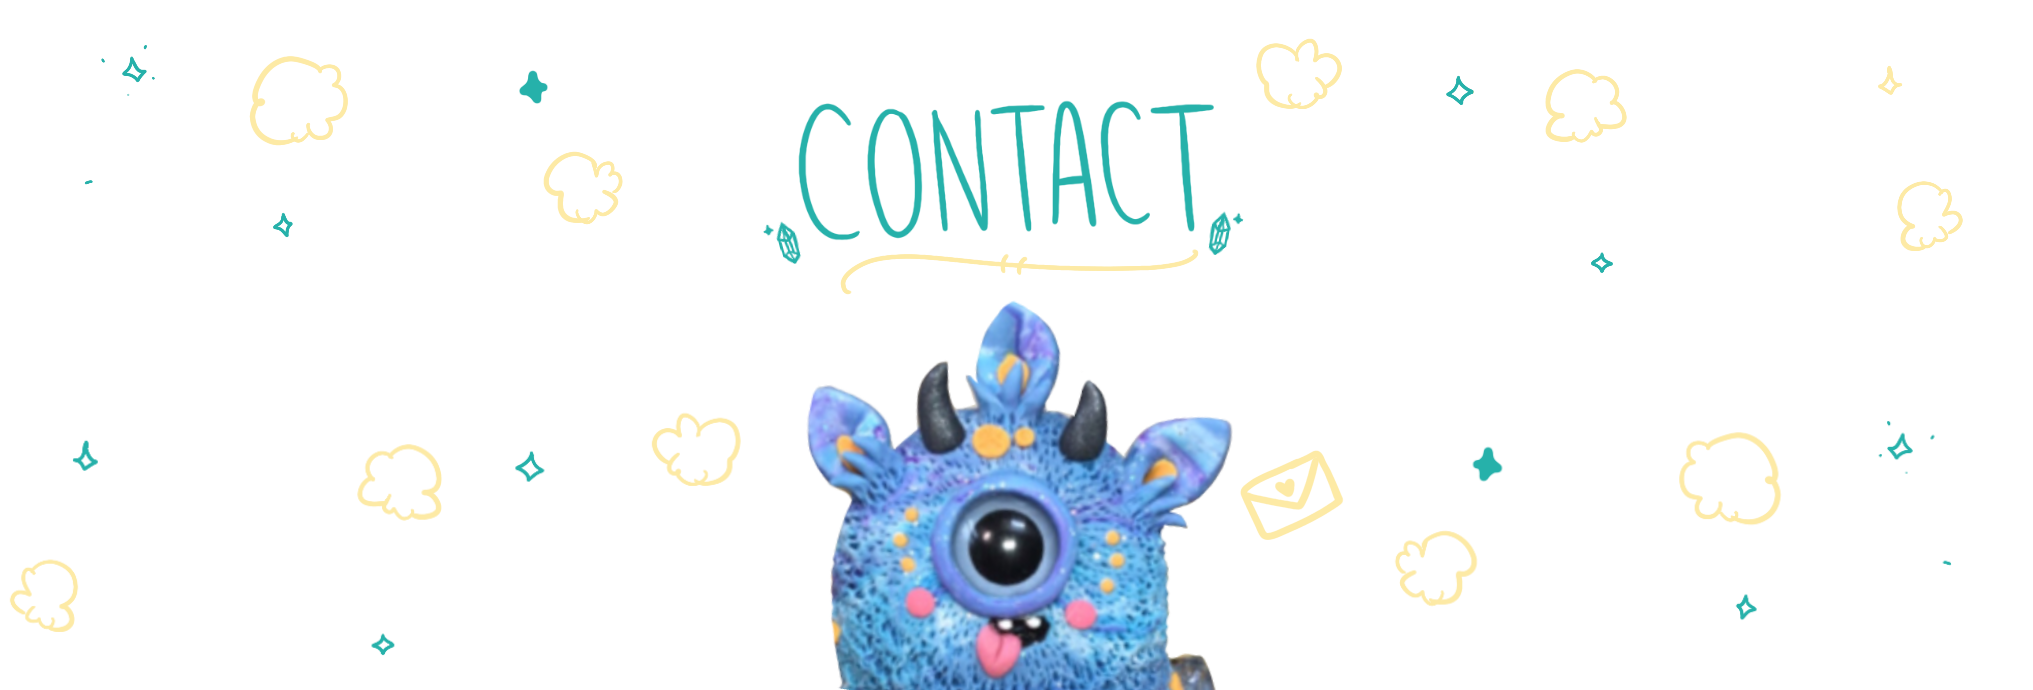 Contact image with Walter the weebeast